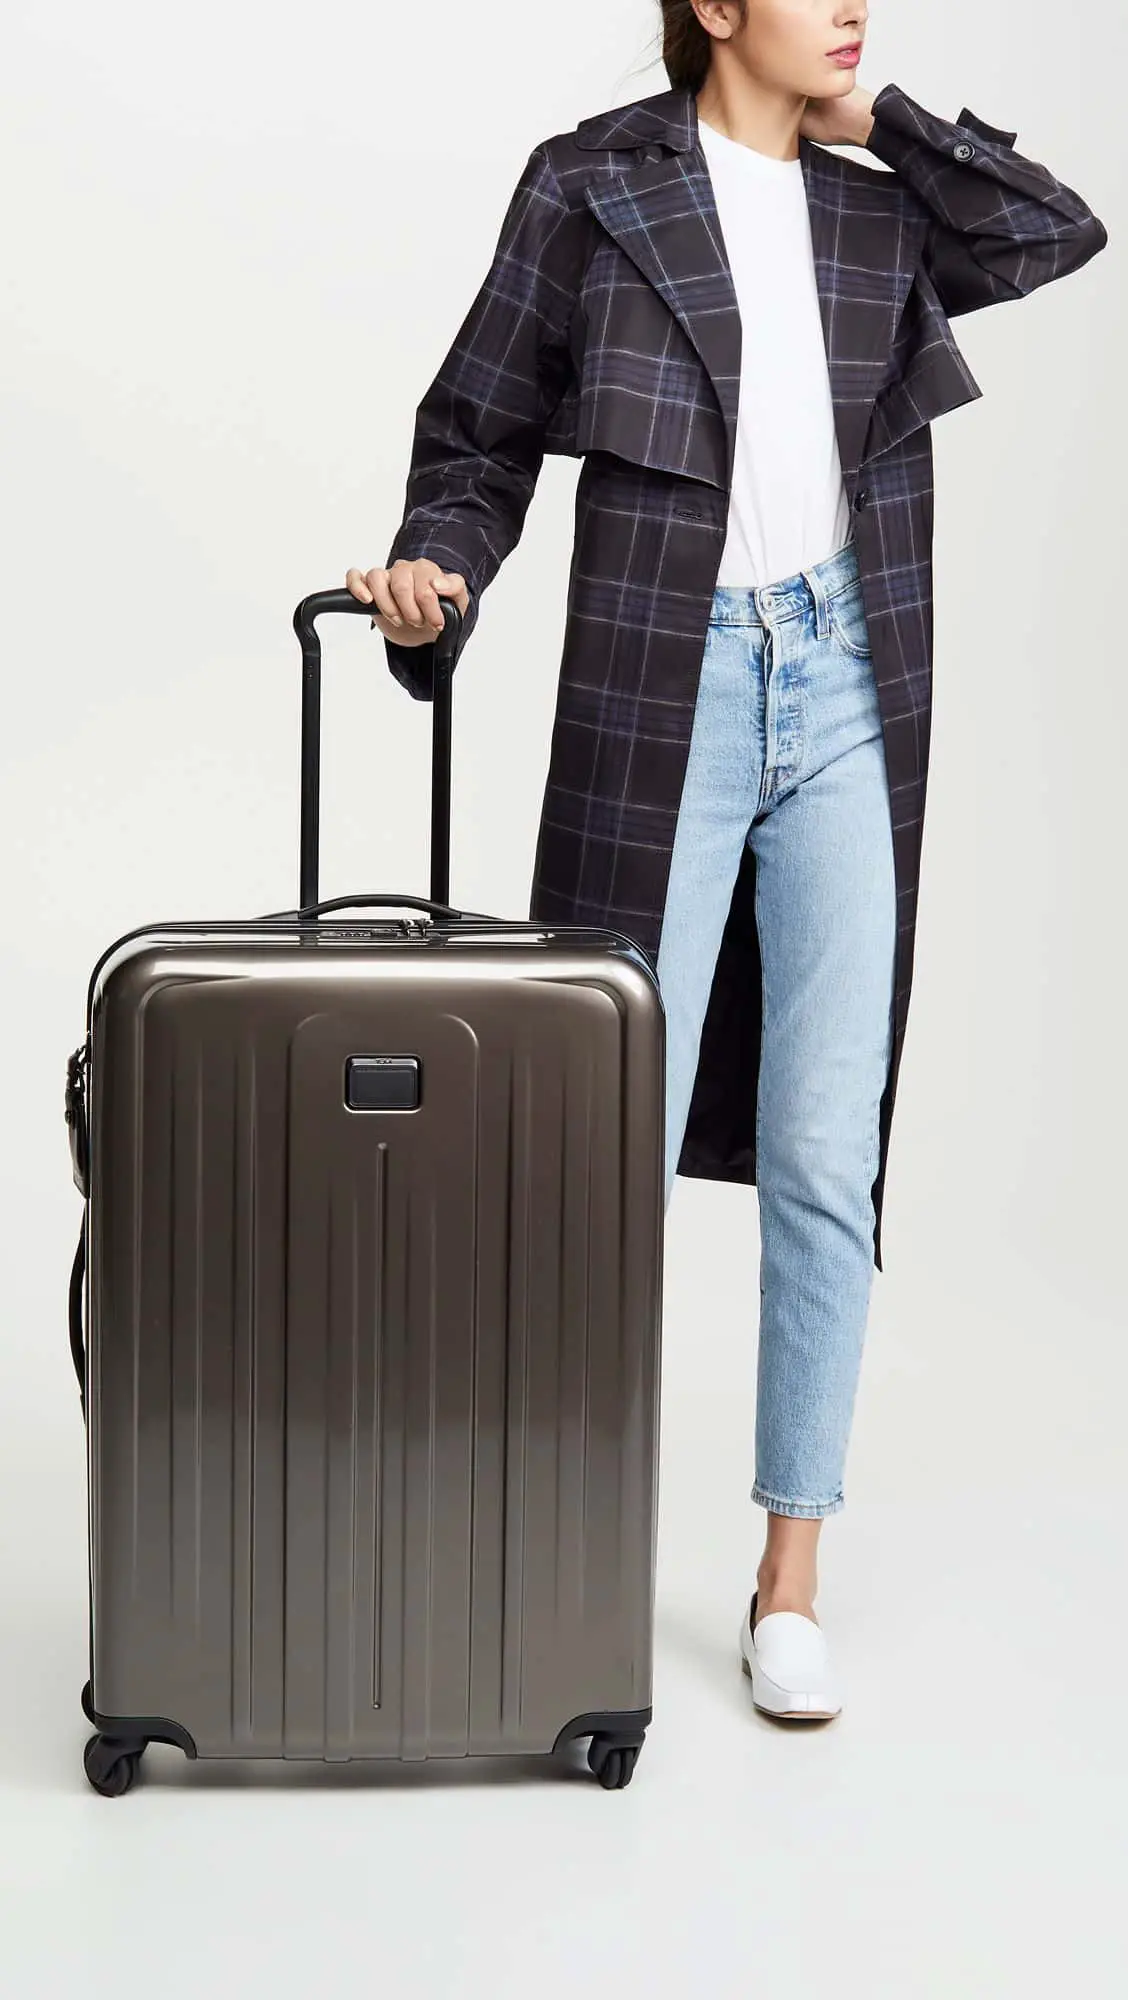 How to Charge a Tumi Smart Suitcase - Luggage Unpacked